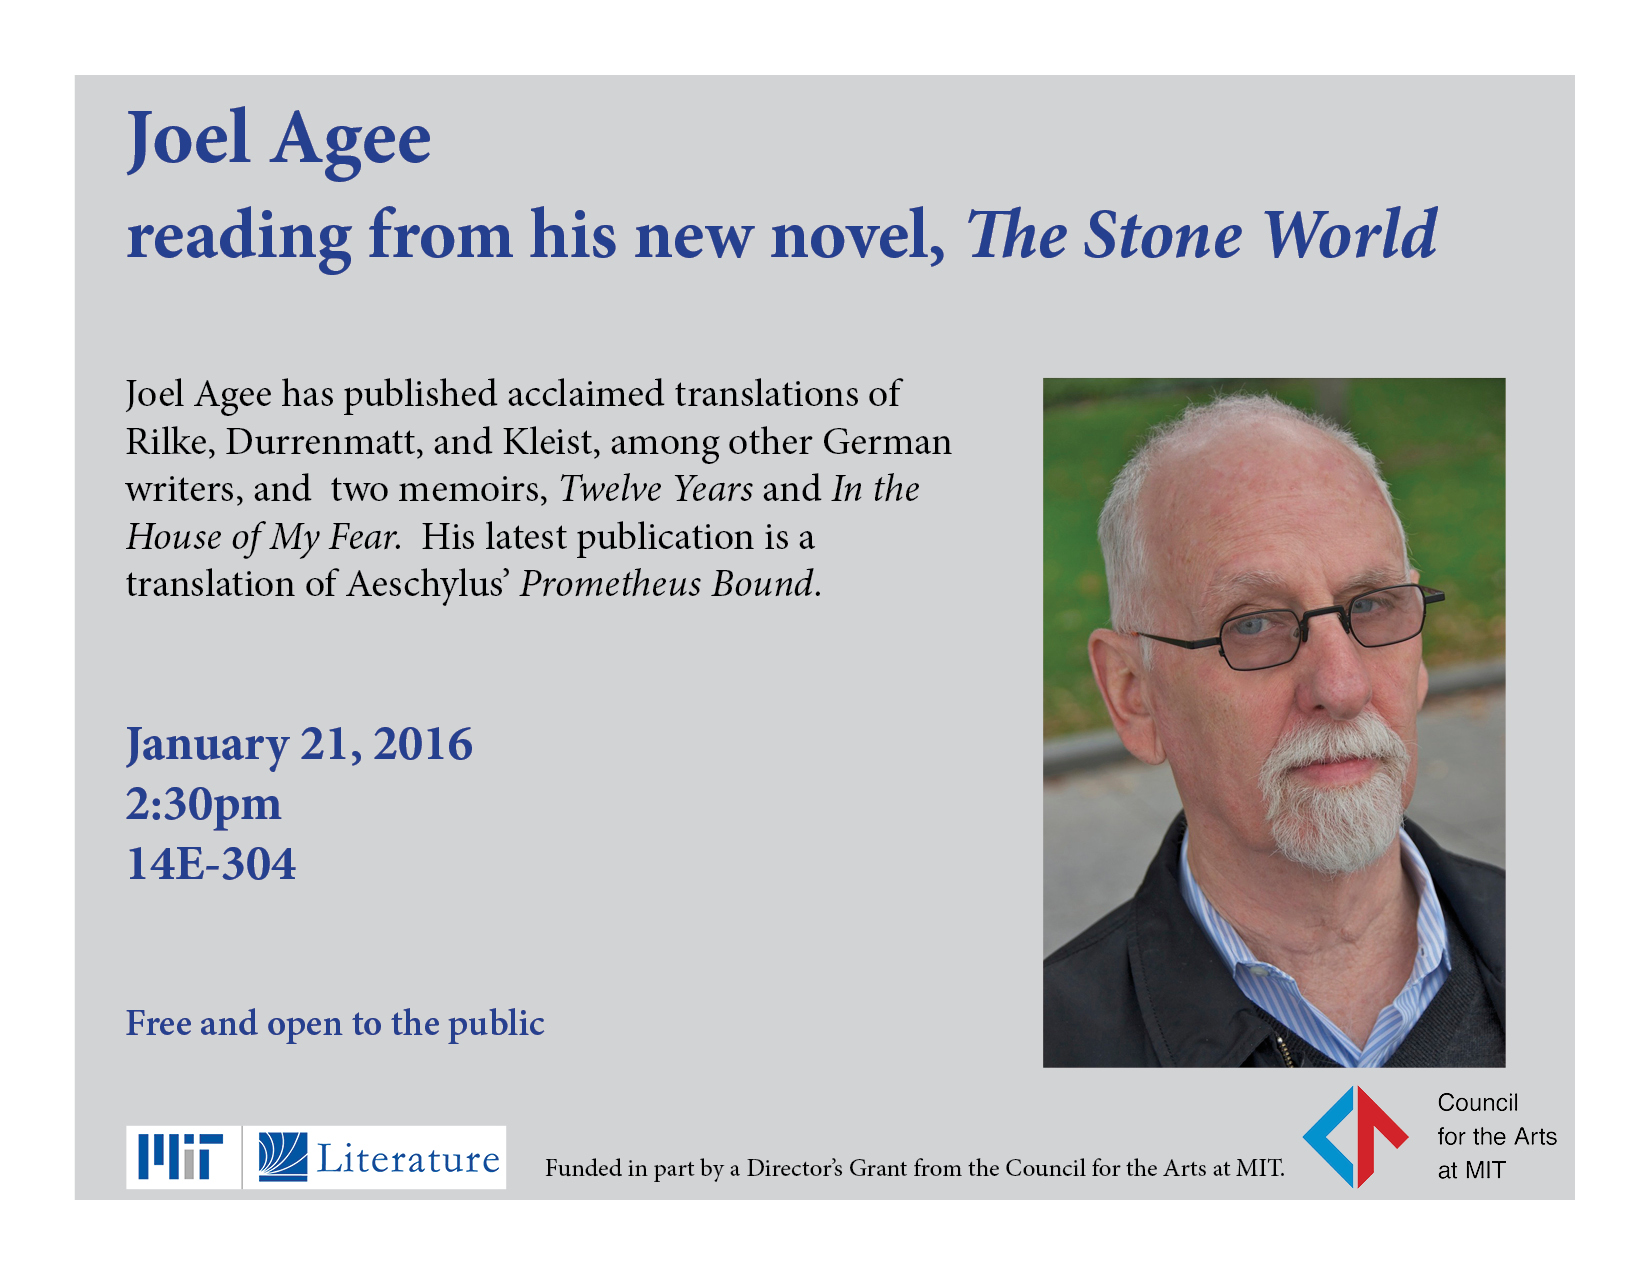 Joel Agee Reading Jan 21, 2016 at 2:30 in 14E-304